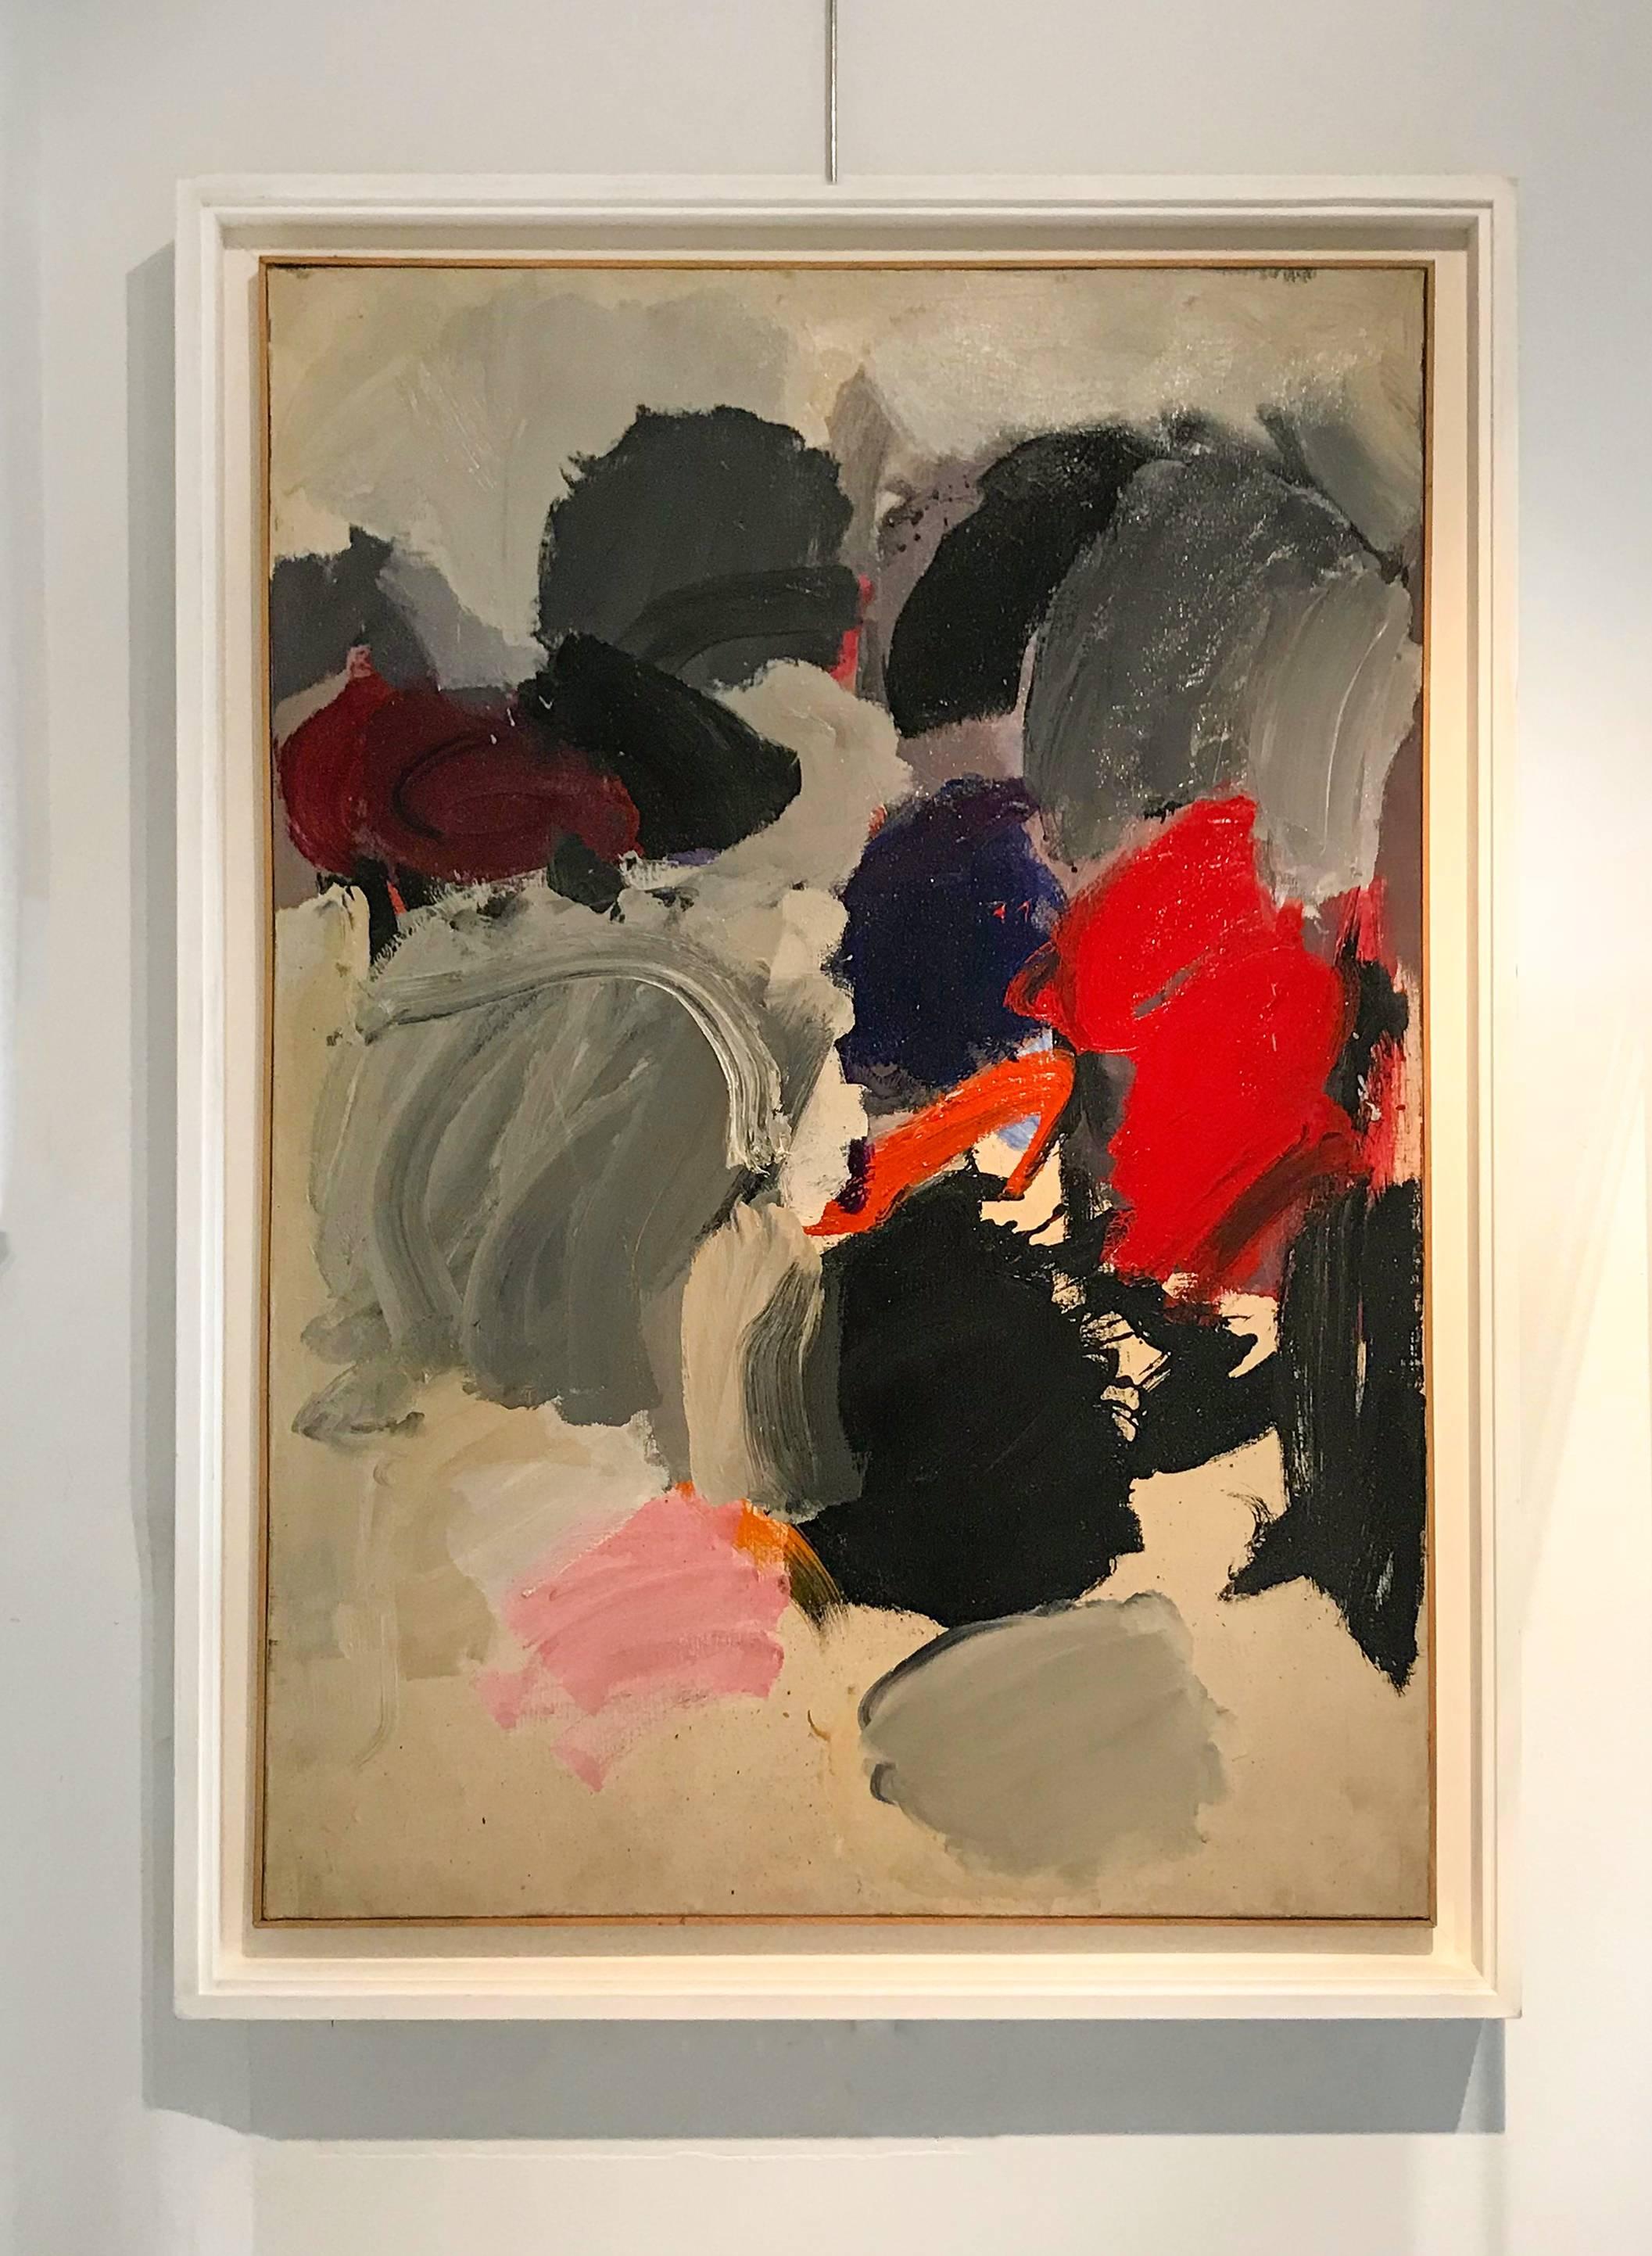 Dieter Wallert (1935-1988) Cloud Spaces n. II, 1961, oil on canvas, signed dated and titled on the verse.

SIZE: cm. 100 x 70 x 2
SIZE WITH FRAME: cm. 110 x 80 x 5.5

Exhibitions: 
Galleria Pater, solo exhibition introduced by E. Tadini, Milan,